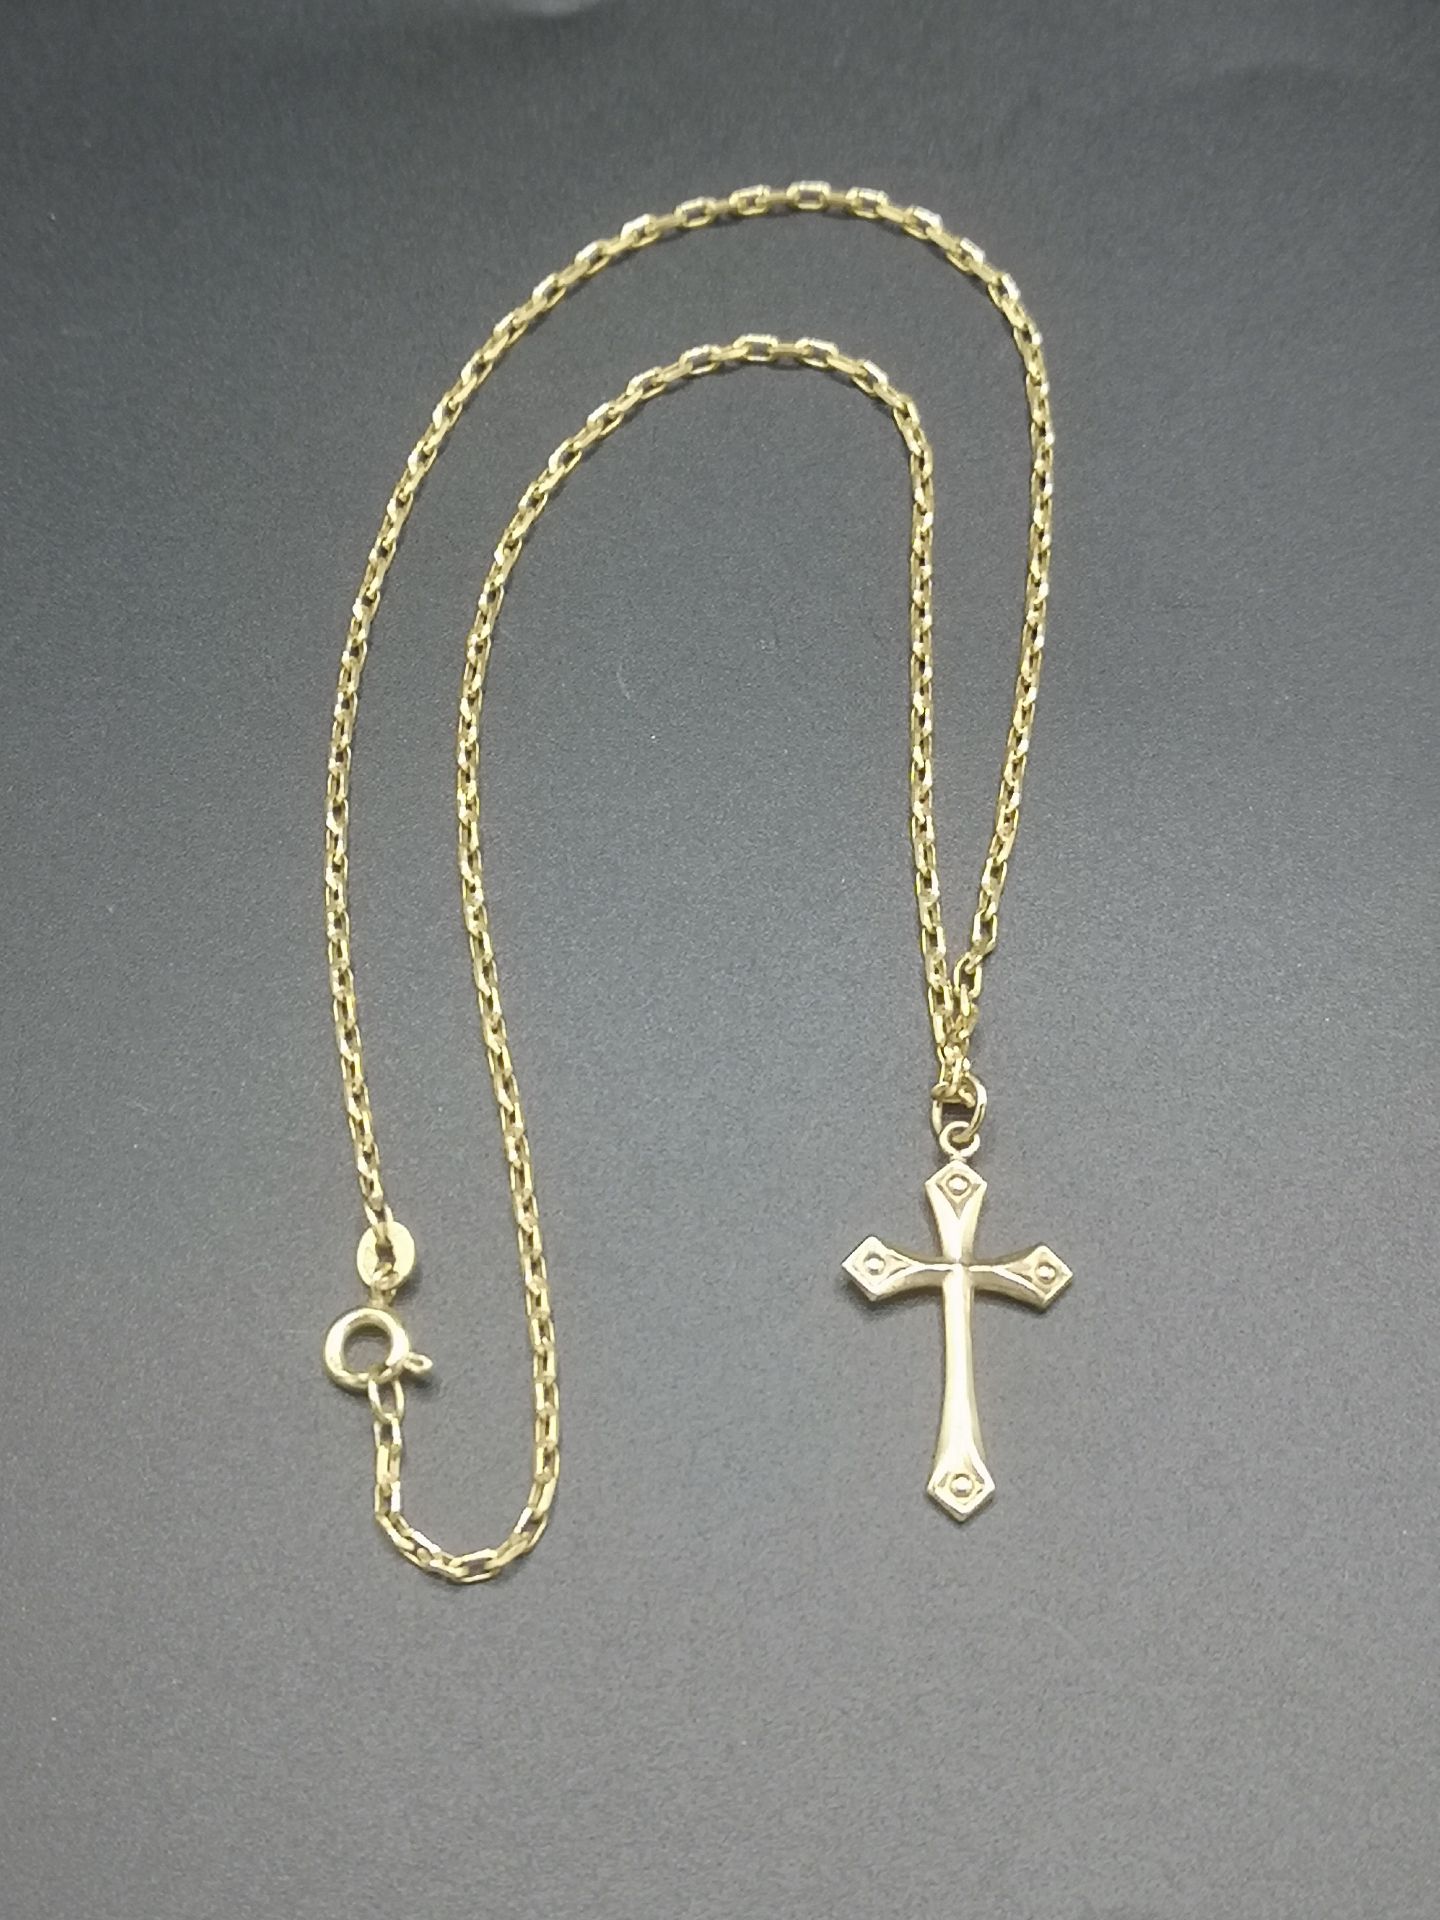 9ct gold necklace and crucifix